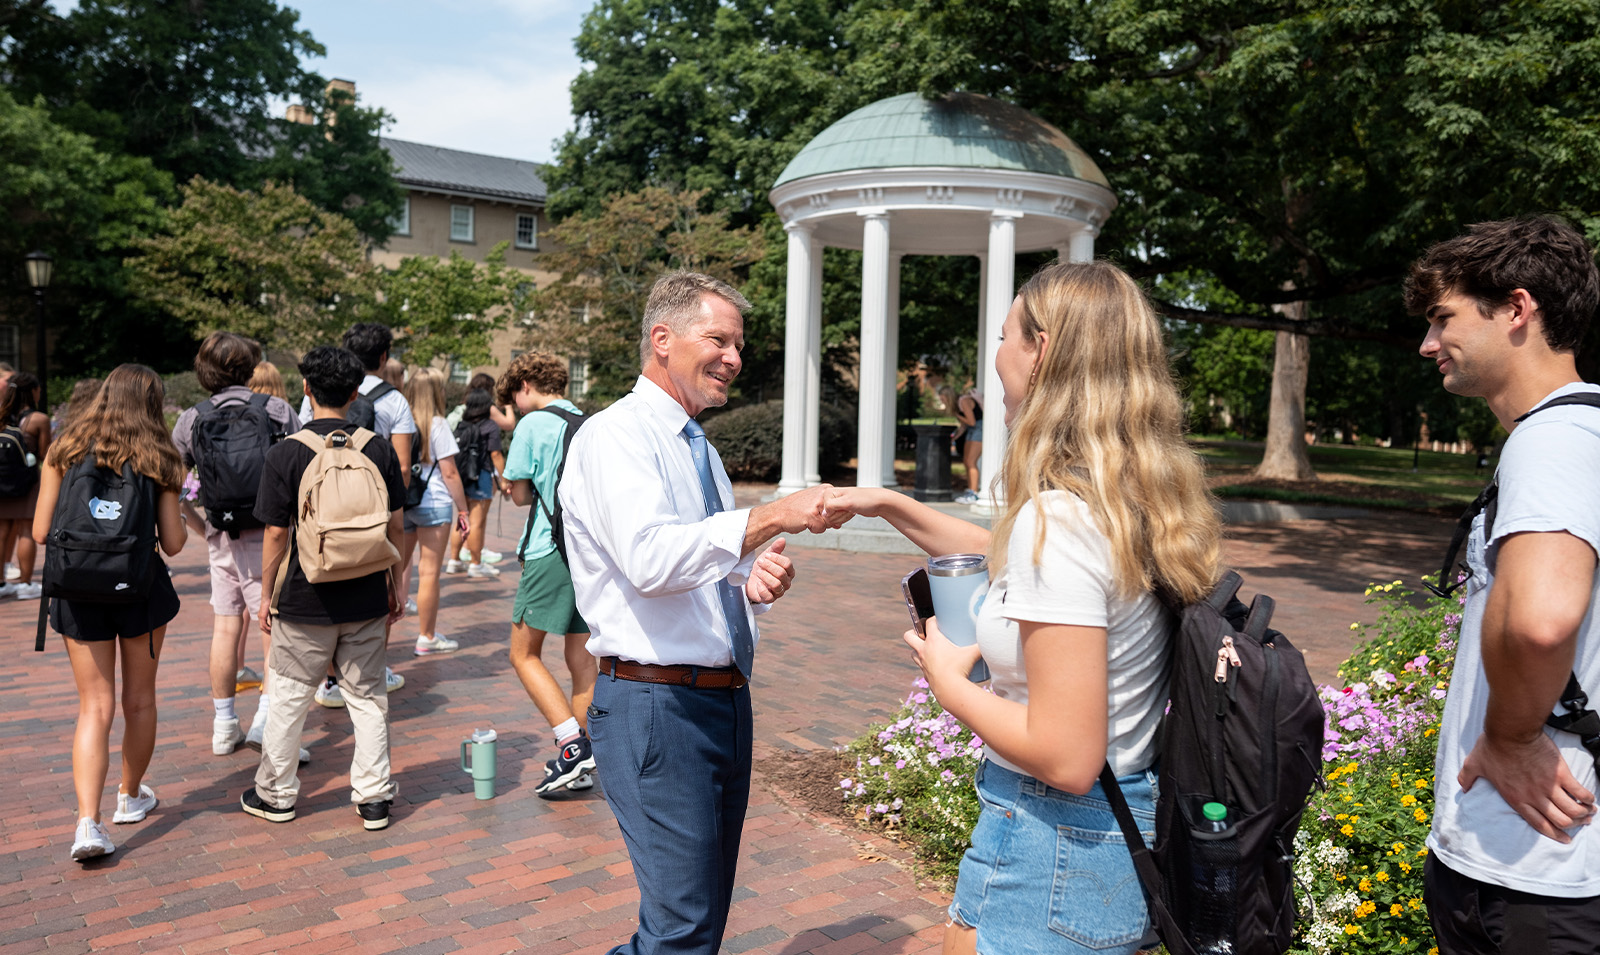 Chancellor Kevin M. Guskiewicz giving a student a fist bump as she waits in line to drink from the Old Well on the first day of the fall semester on the campus of UNC-Chapel Hill.